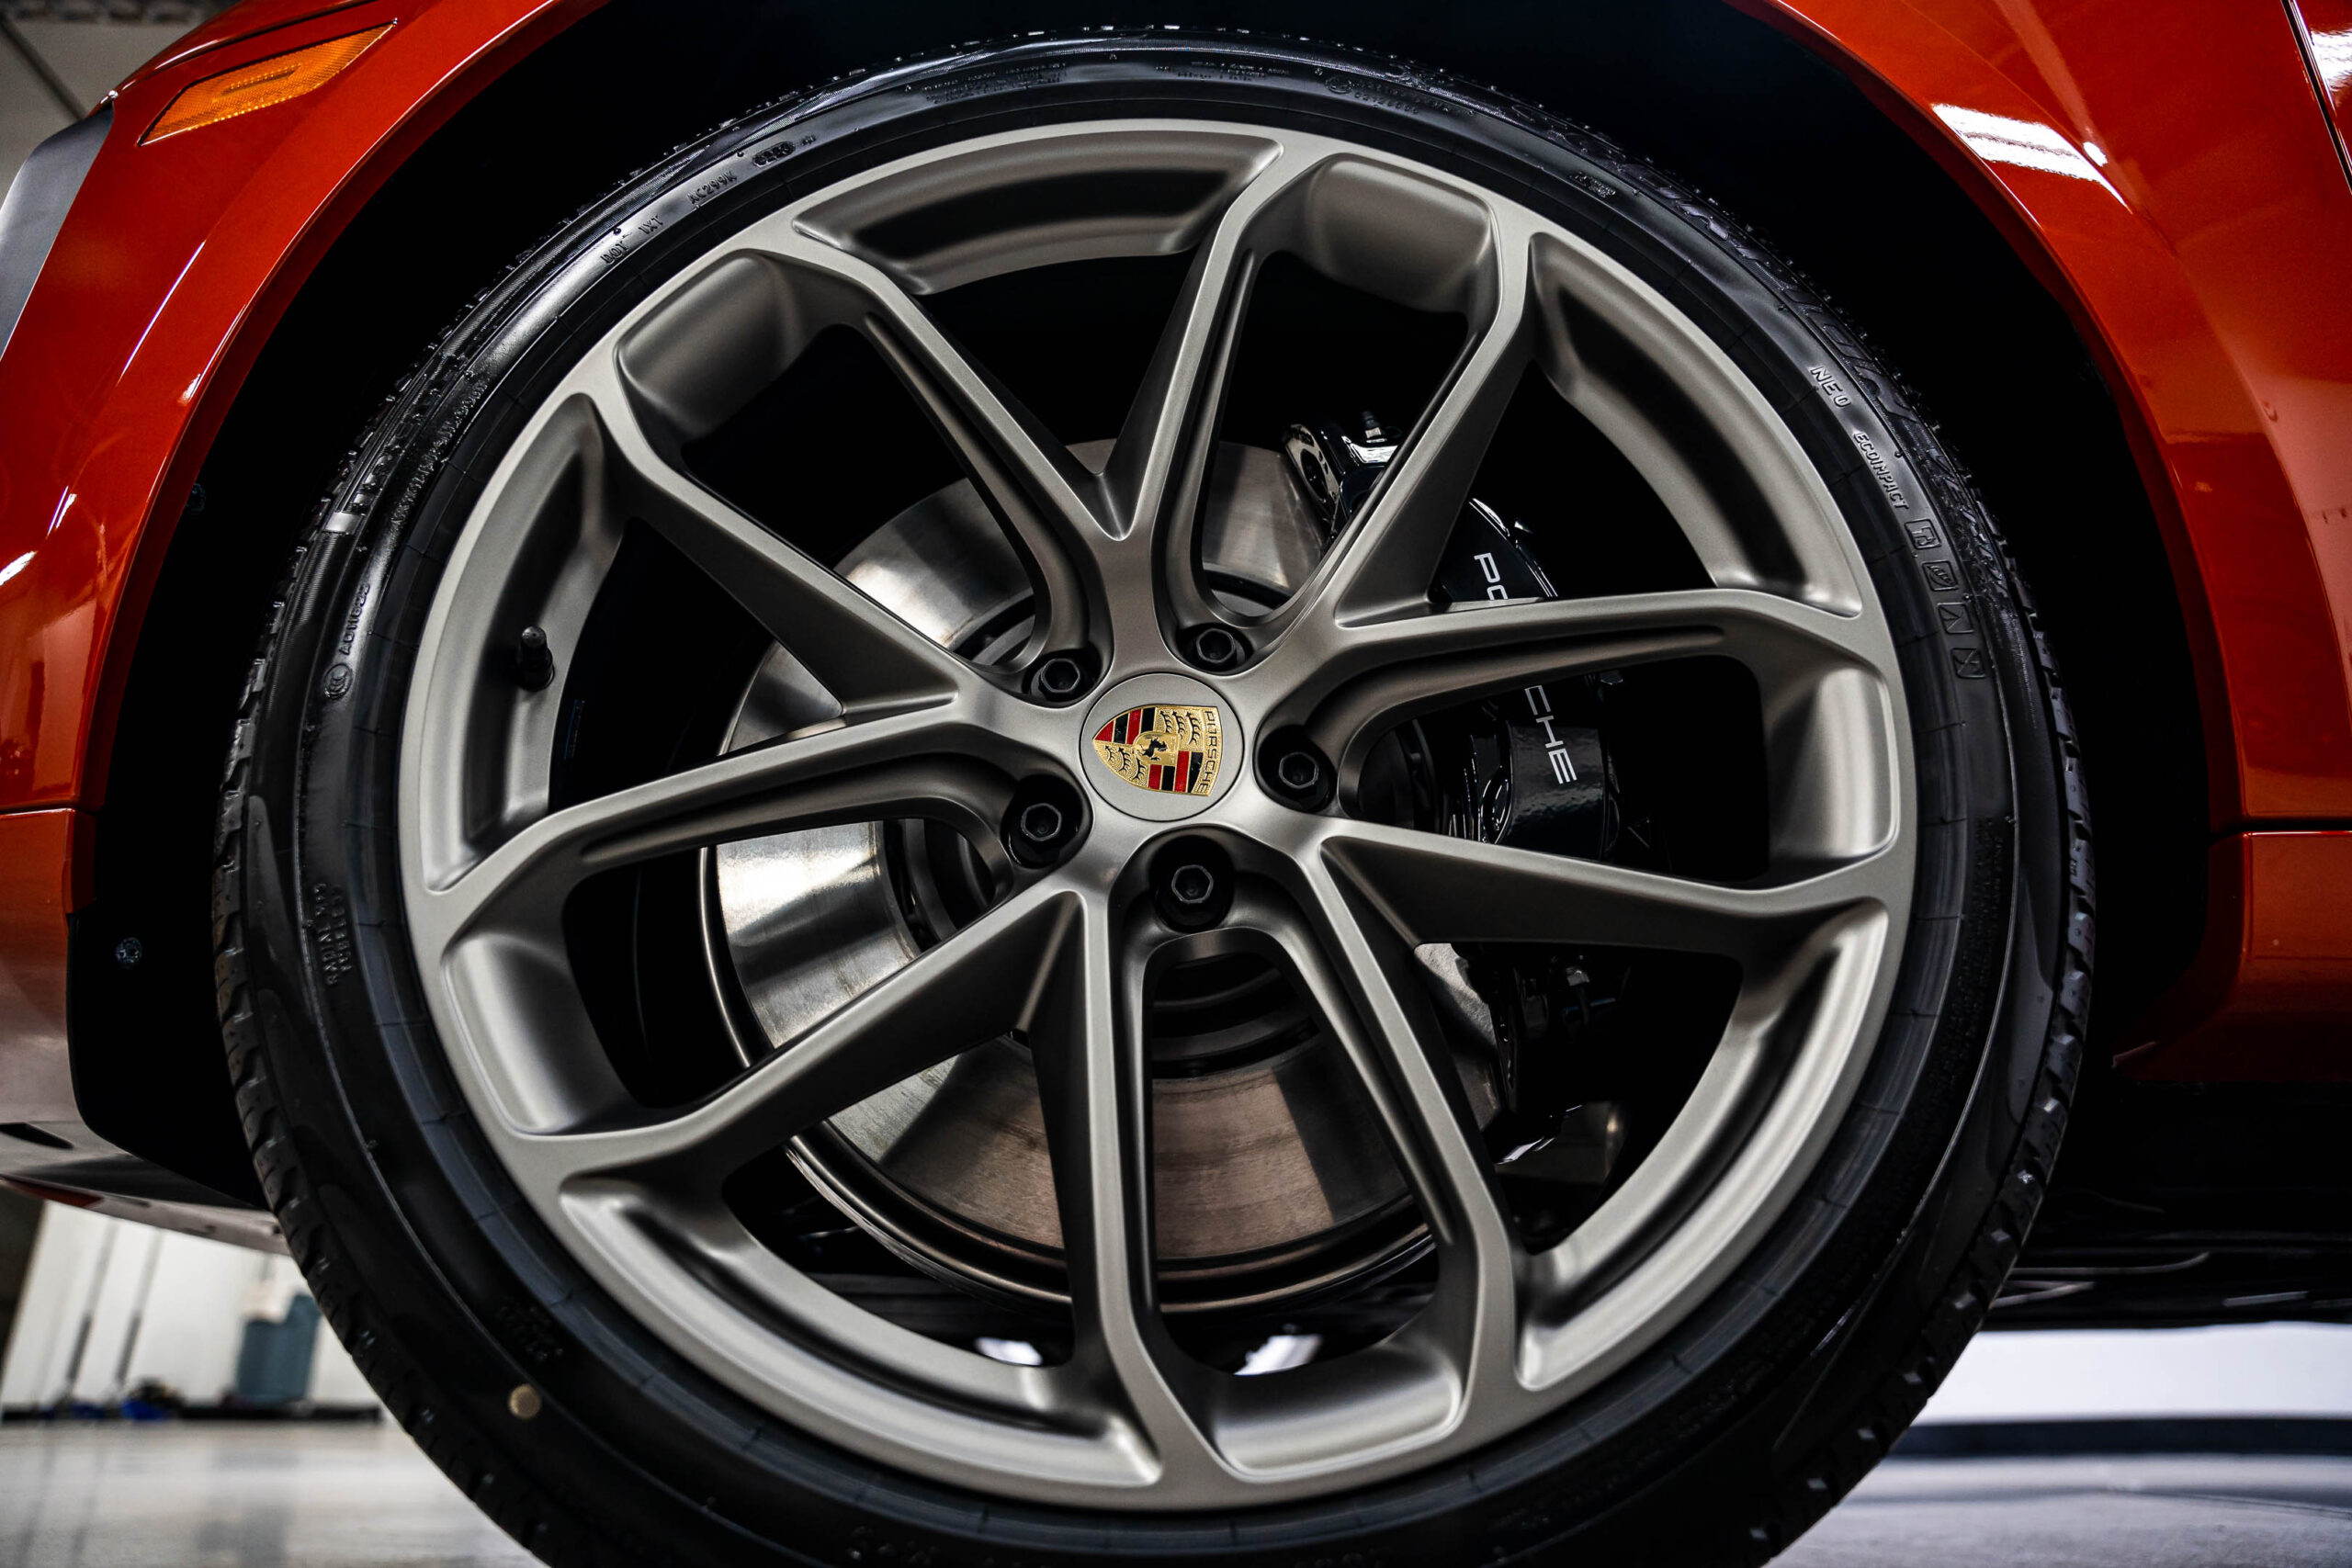 Porsche wheels protected from road grime thanks to GYEON ceramic coatings